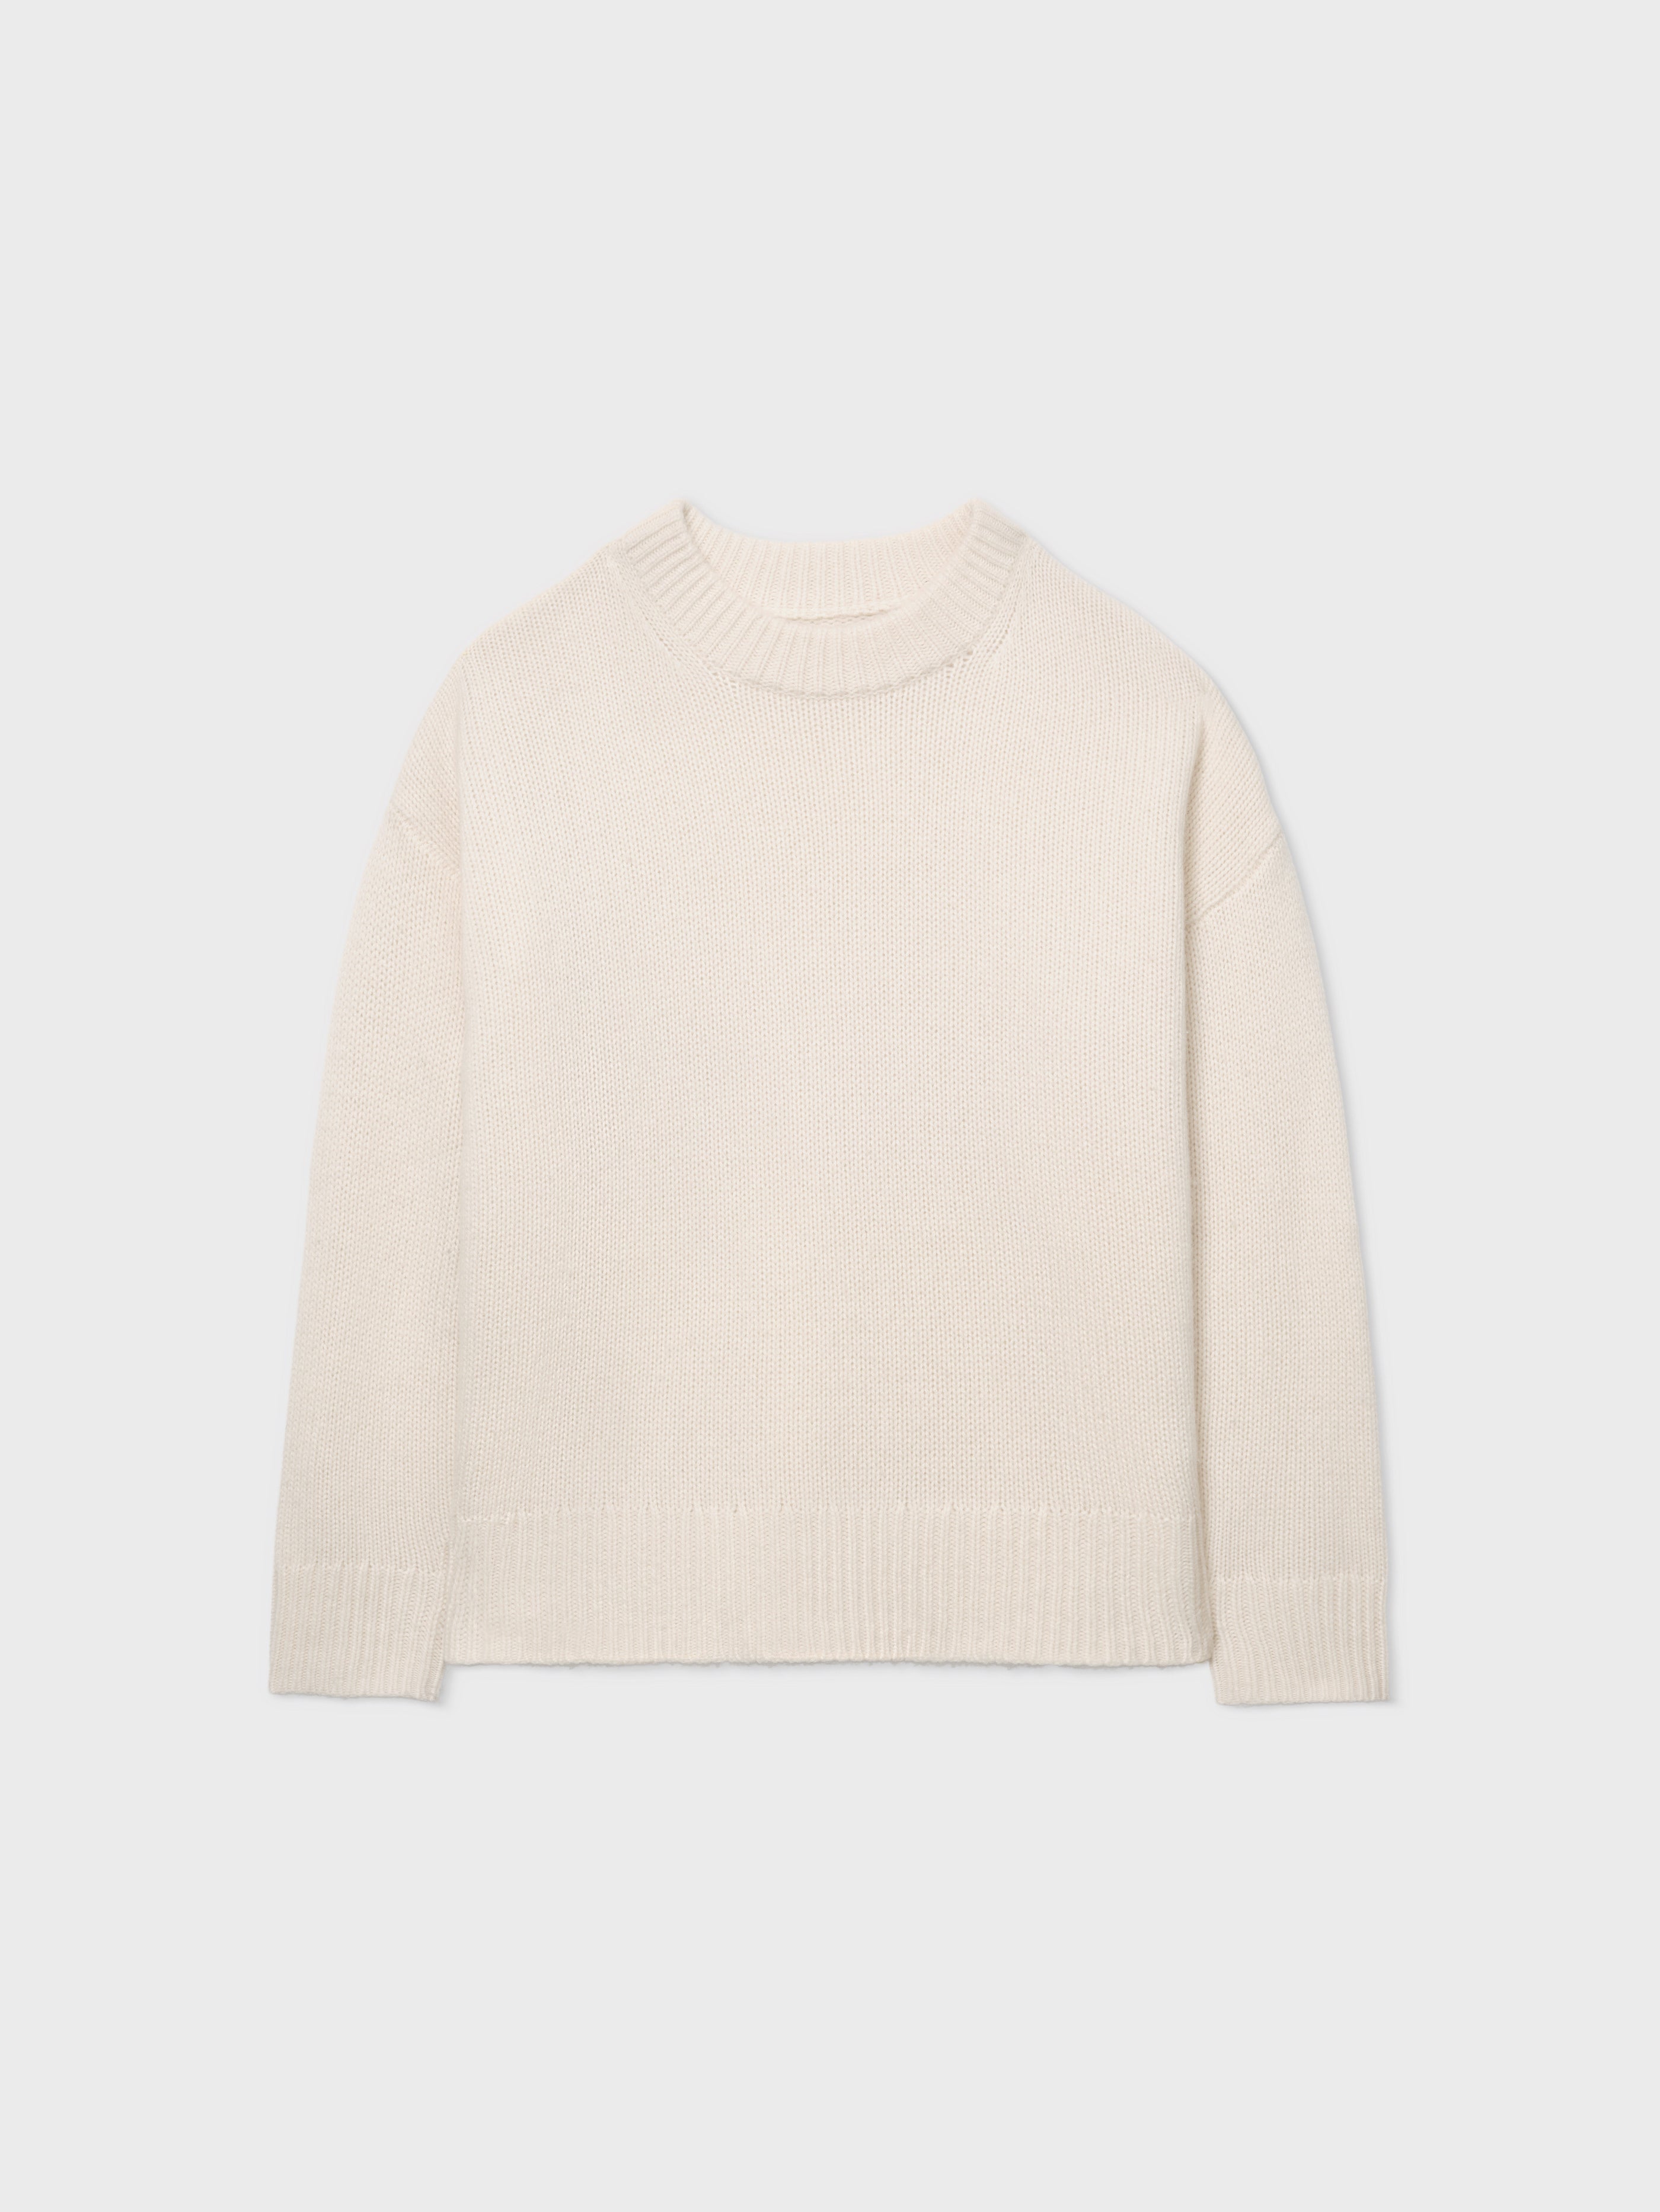 Boyfriend Sweater in Cashmere - Ivory - CO Collections